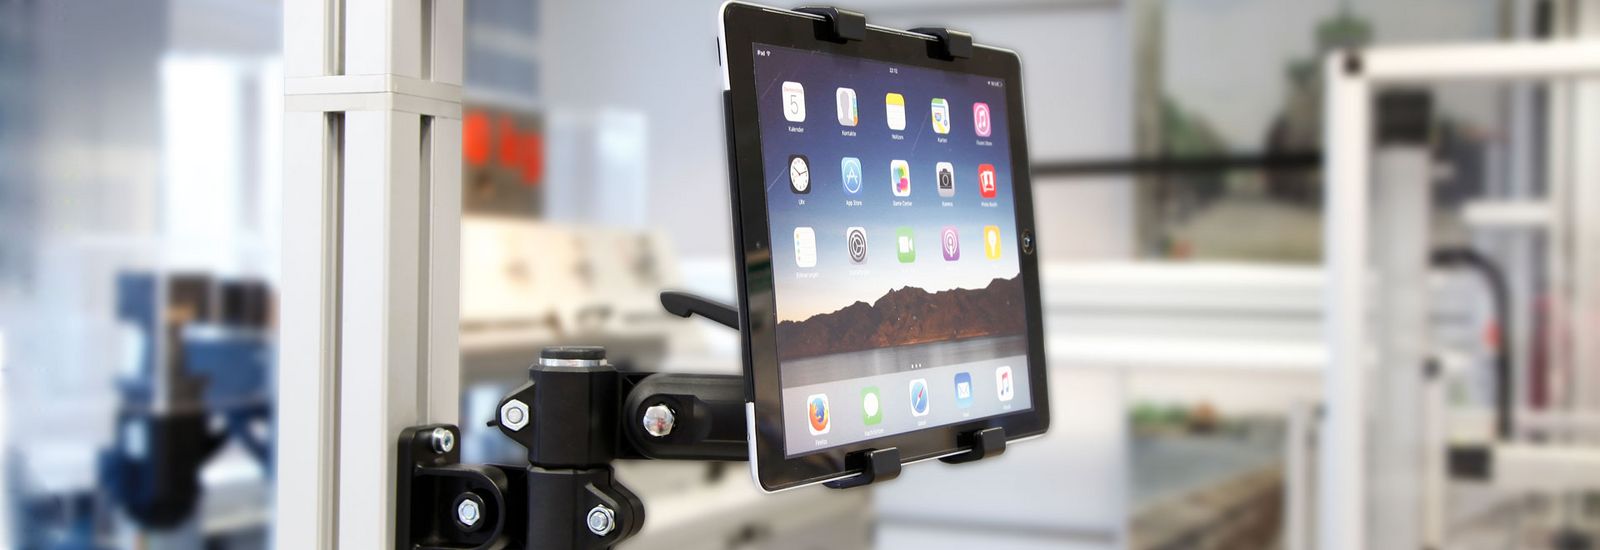 The tablet holder can be mounted directly on the fastening flange of the RK monitor mounting